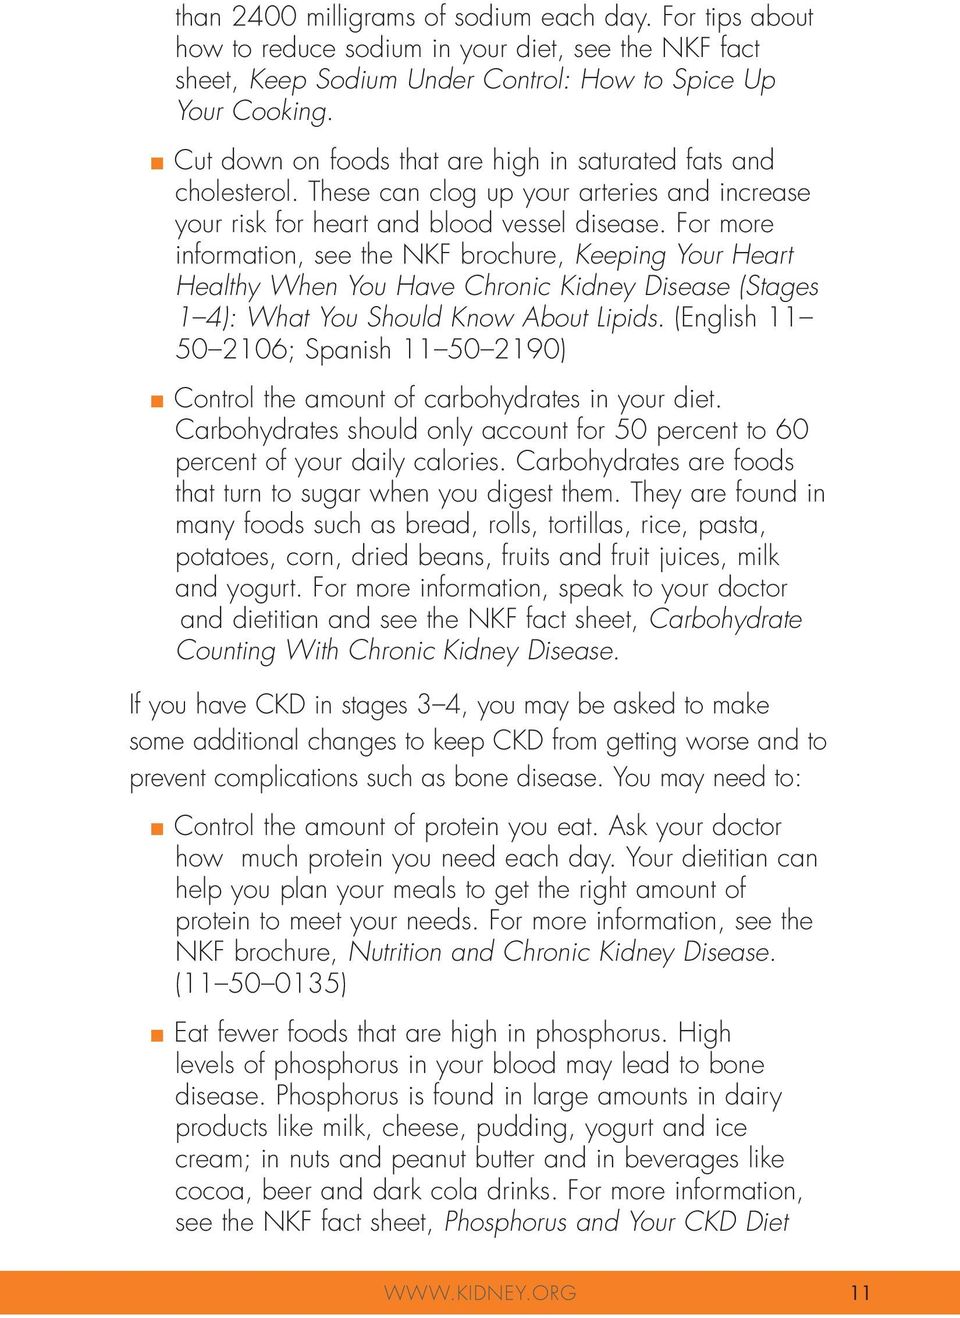 For more information, see the NKF brochure, Keeping Your Heart Healthy When You Have Chronic Kidney Disease (Stages 1 4): What You Should Know About Lipids.